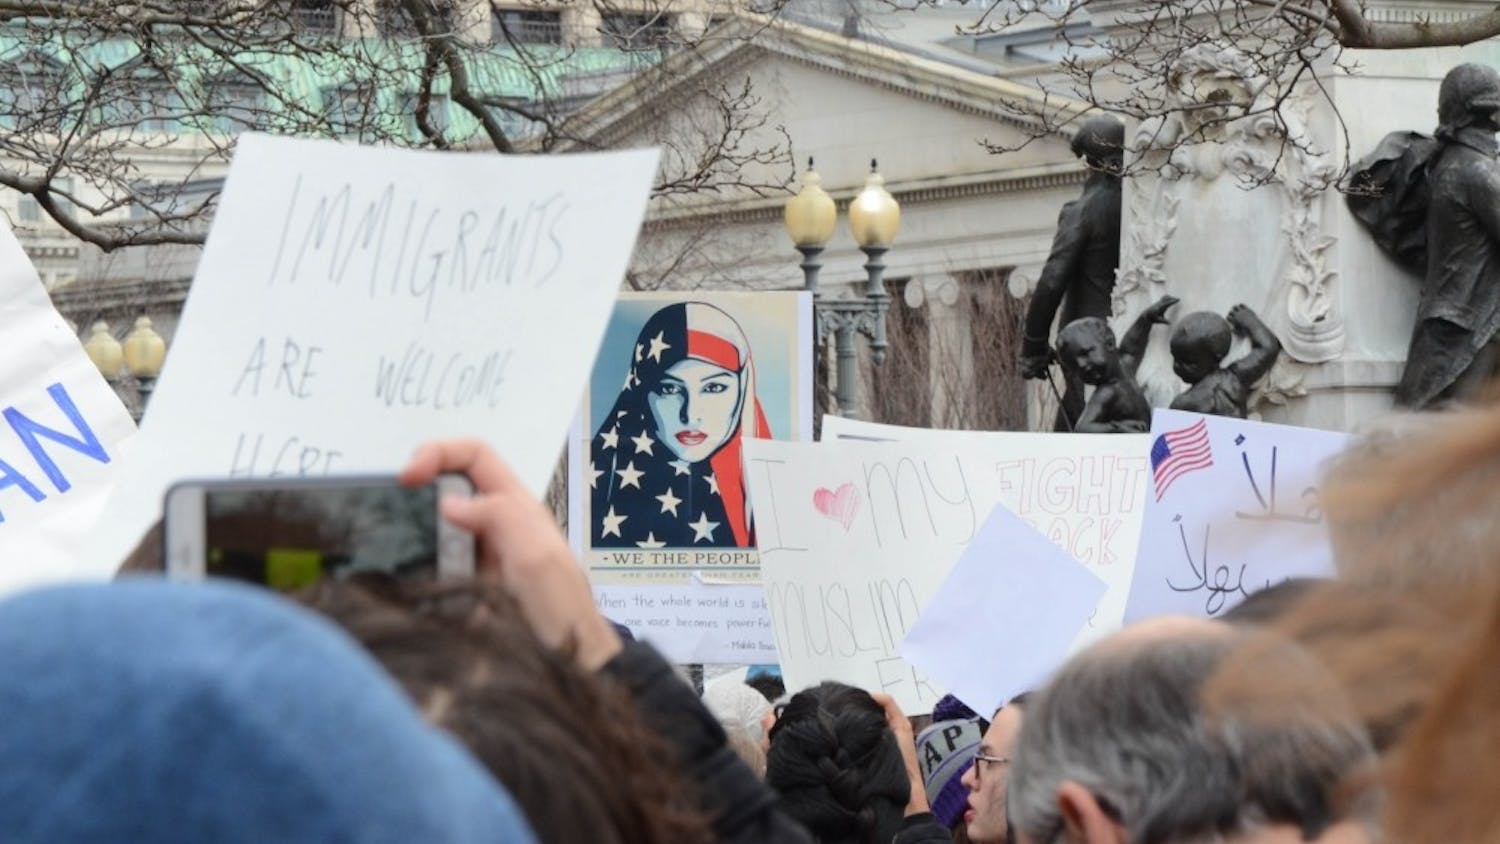 Since President Trump's election, there have been multiple rallies throughout D.C. in support of both undocumented immigrants and those affected by the administration's travel ban.